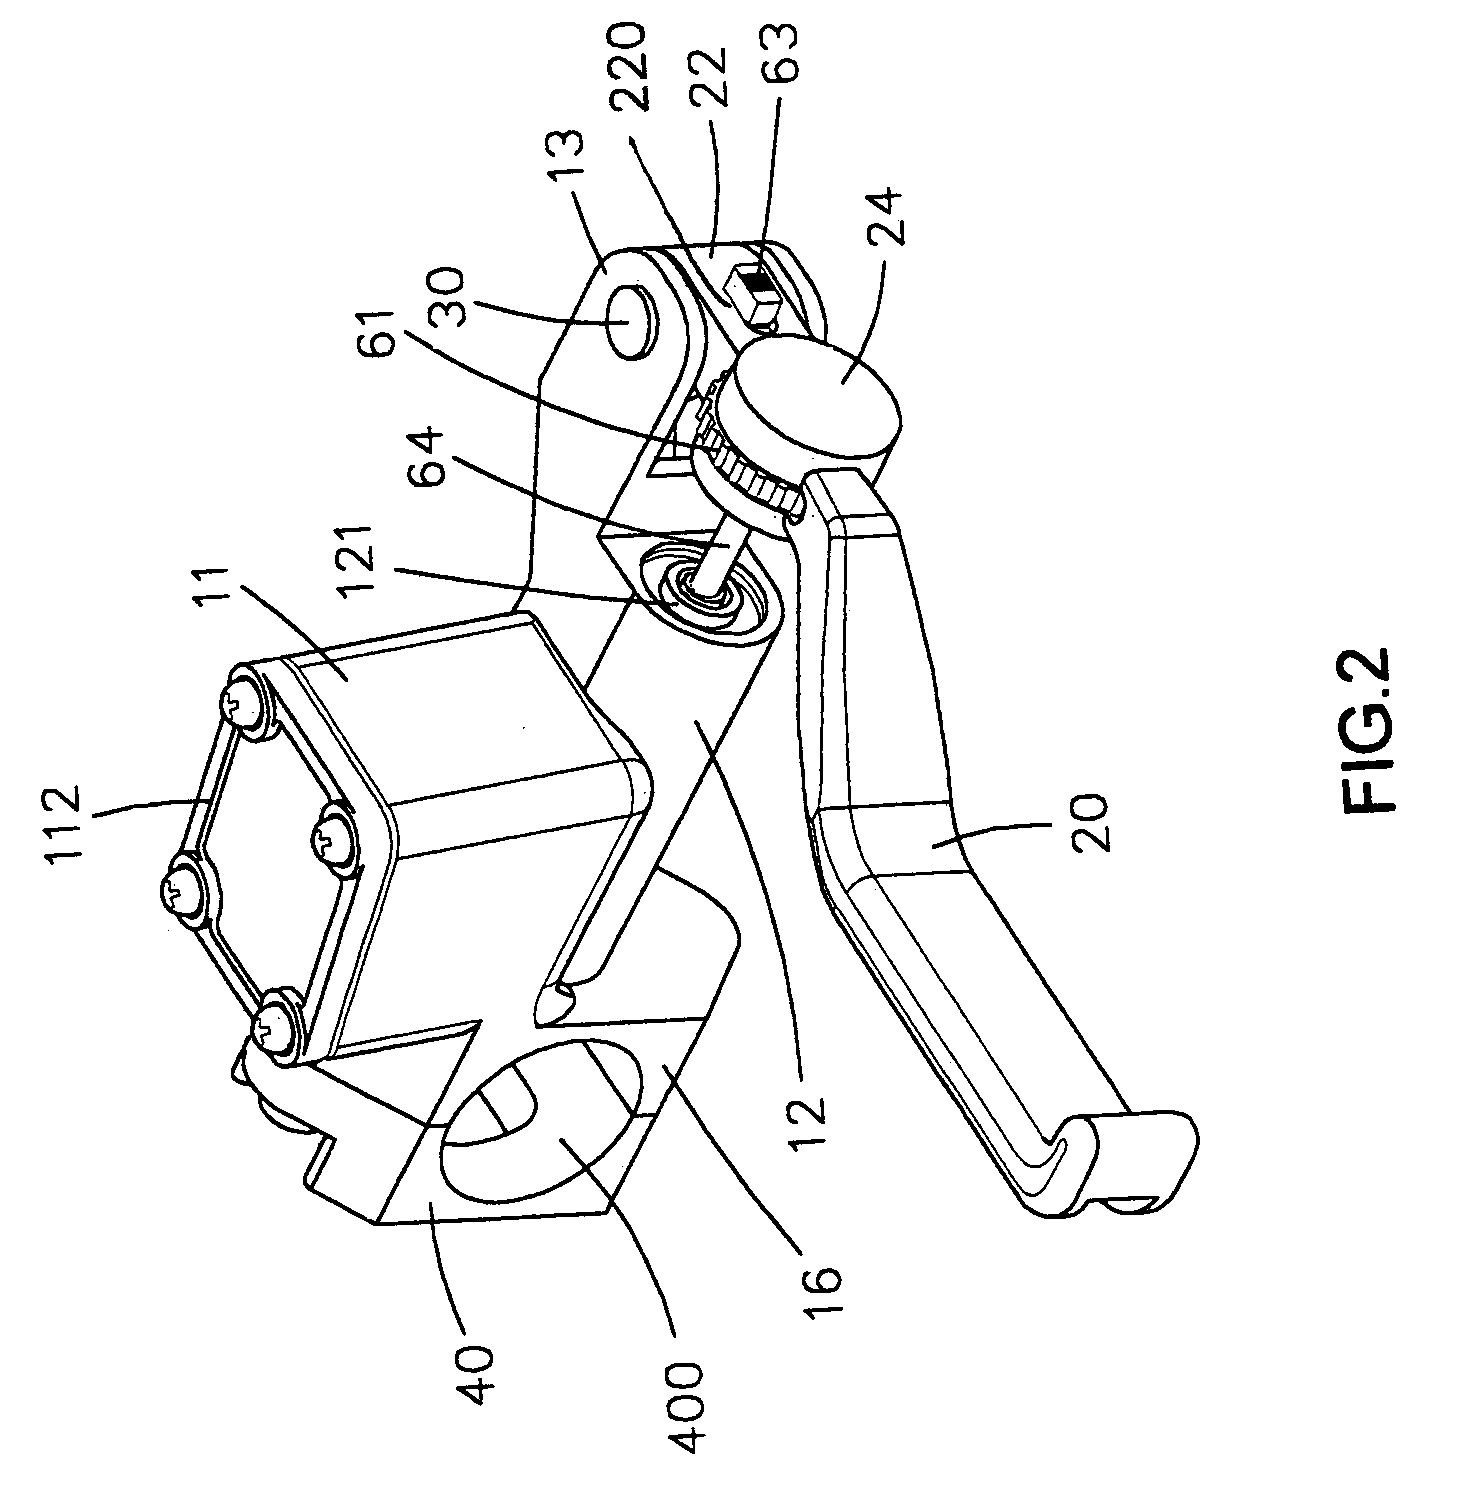 Hydraulic brake lever for a bicycle